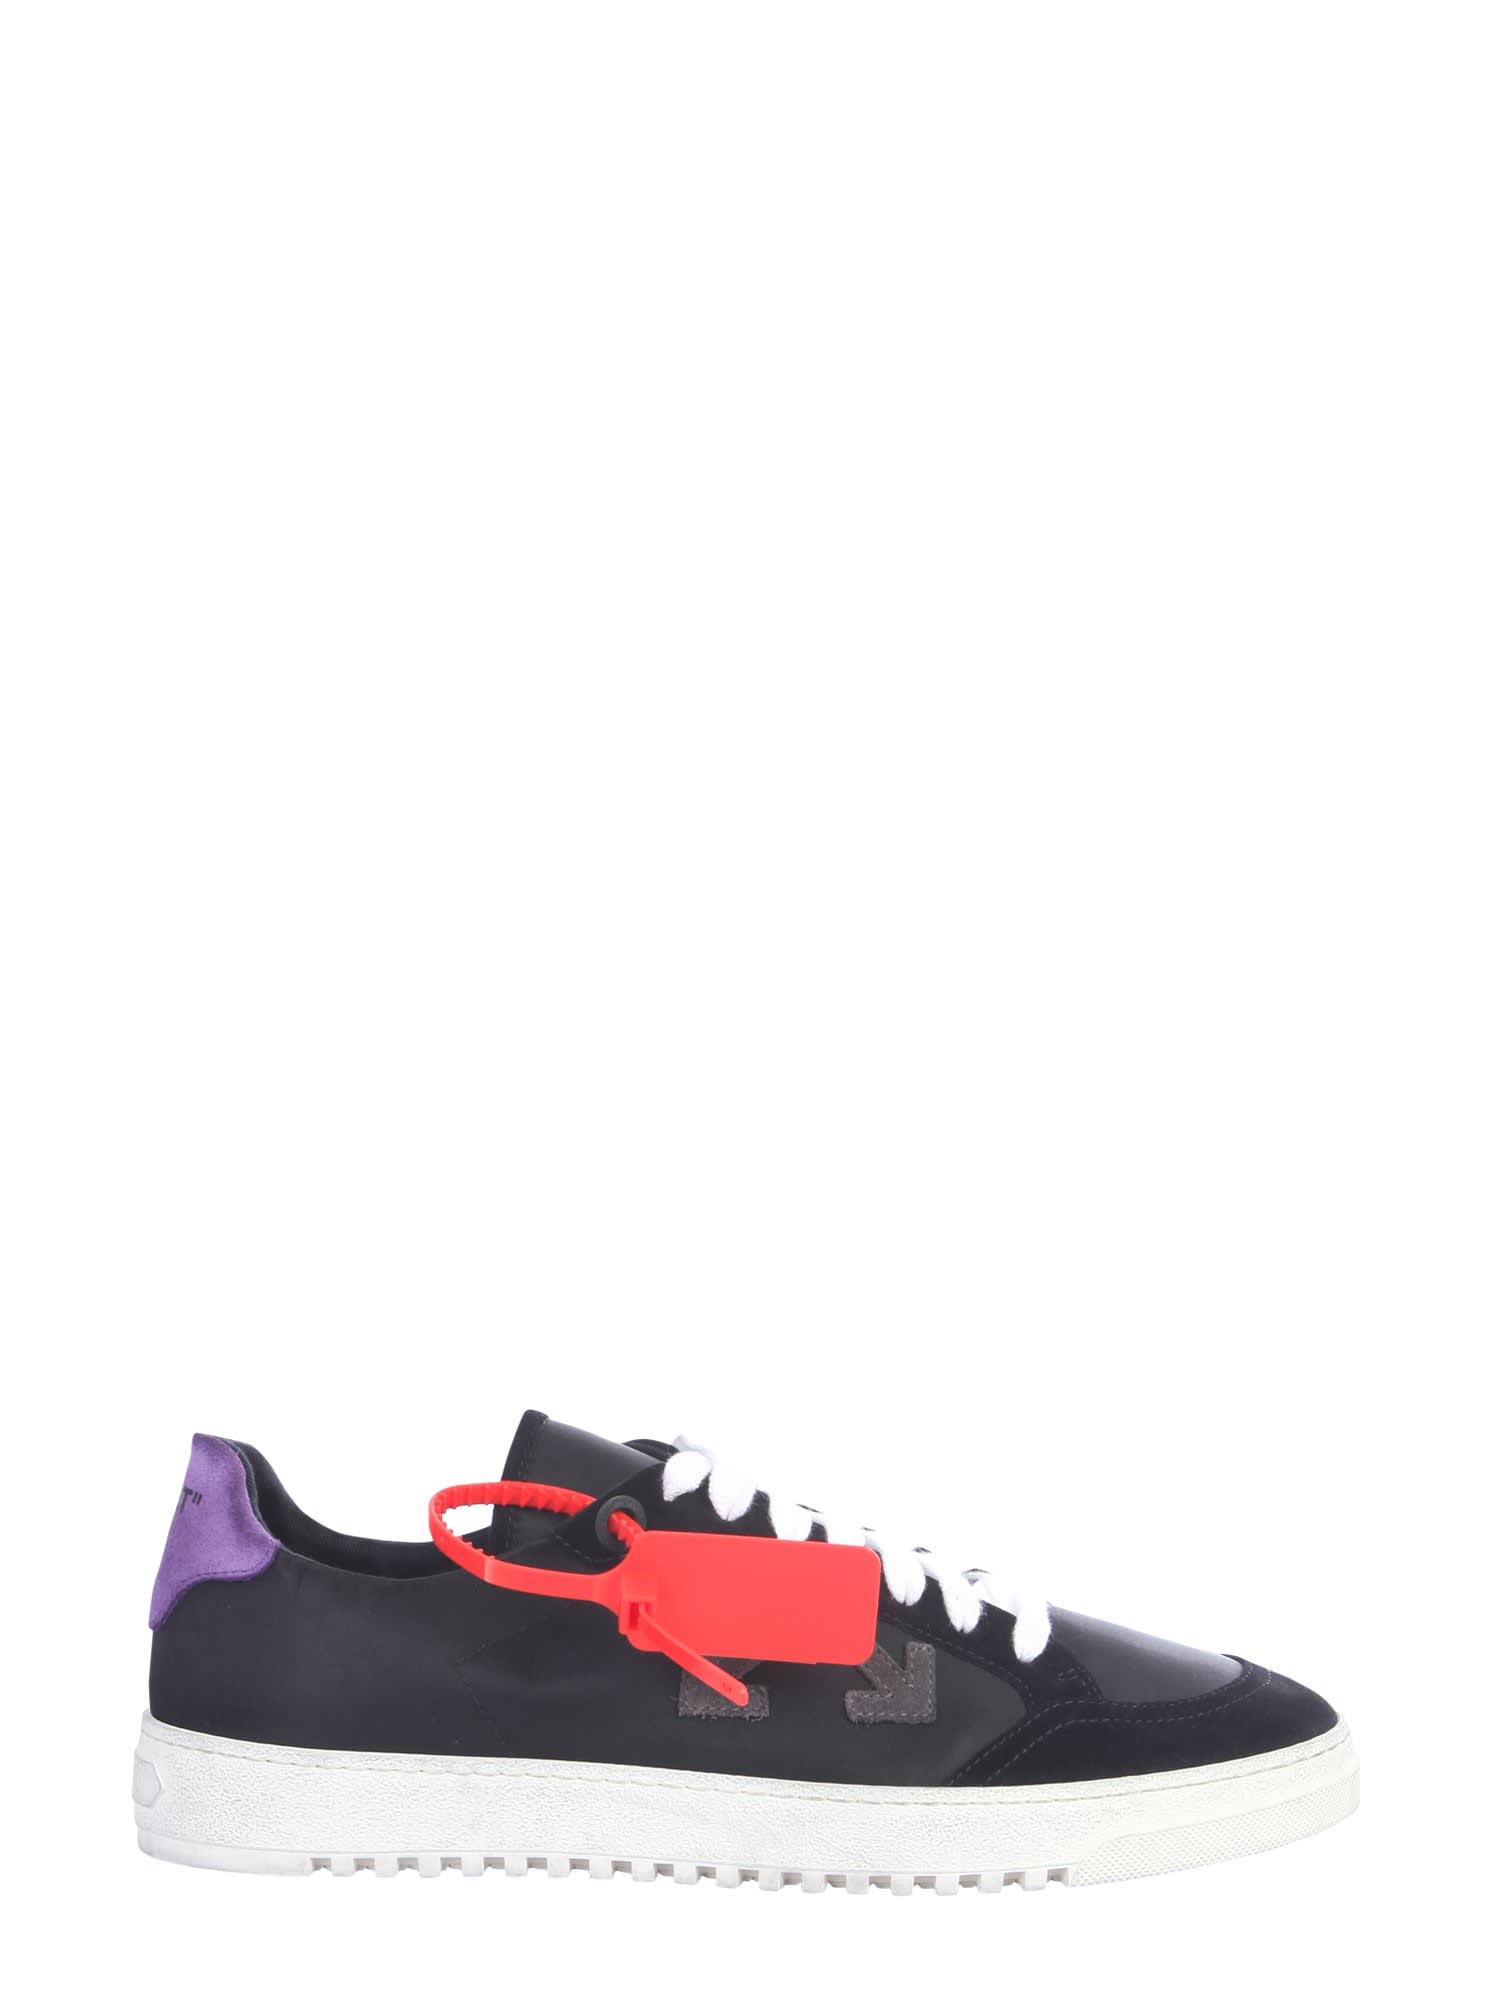 OFF-WHITE 2.0 LOW SNEAKERS,11266209